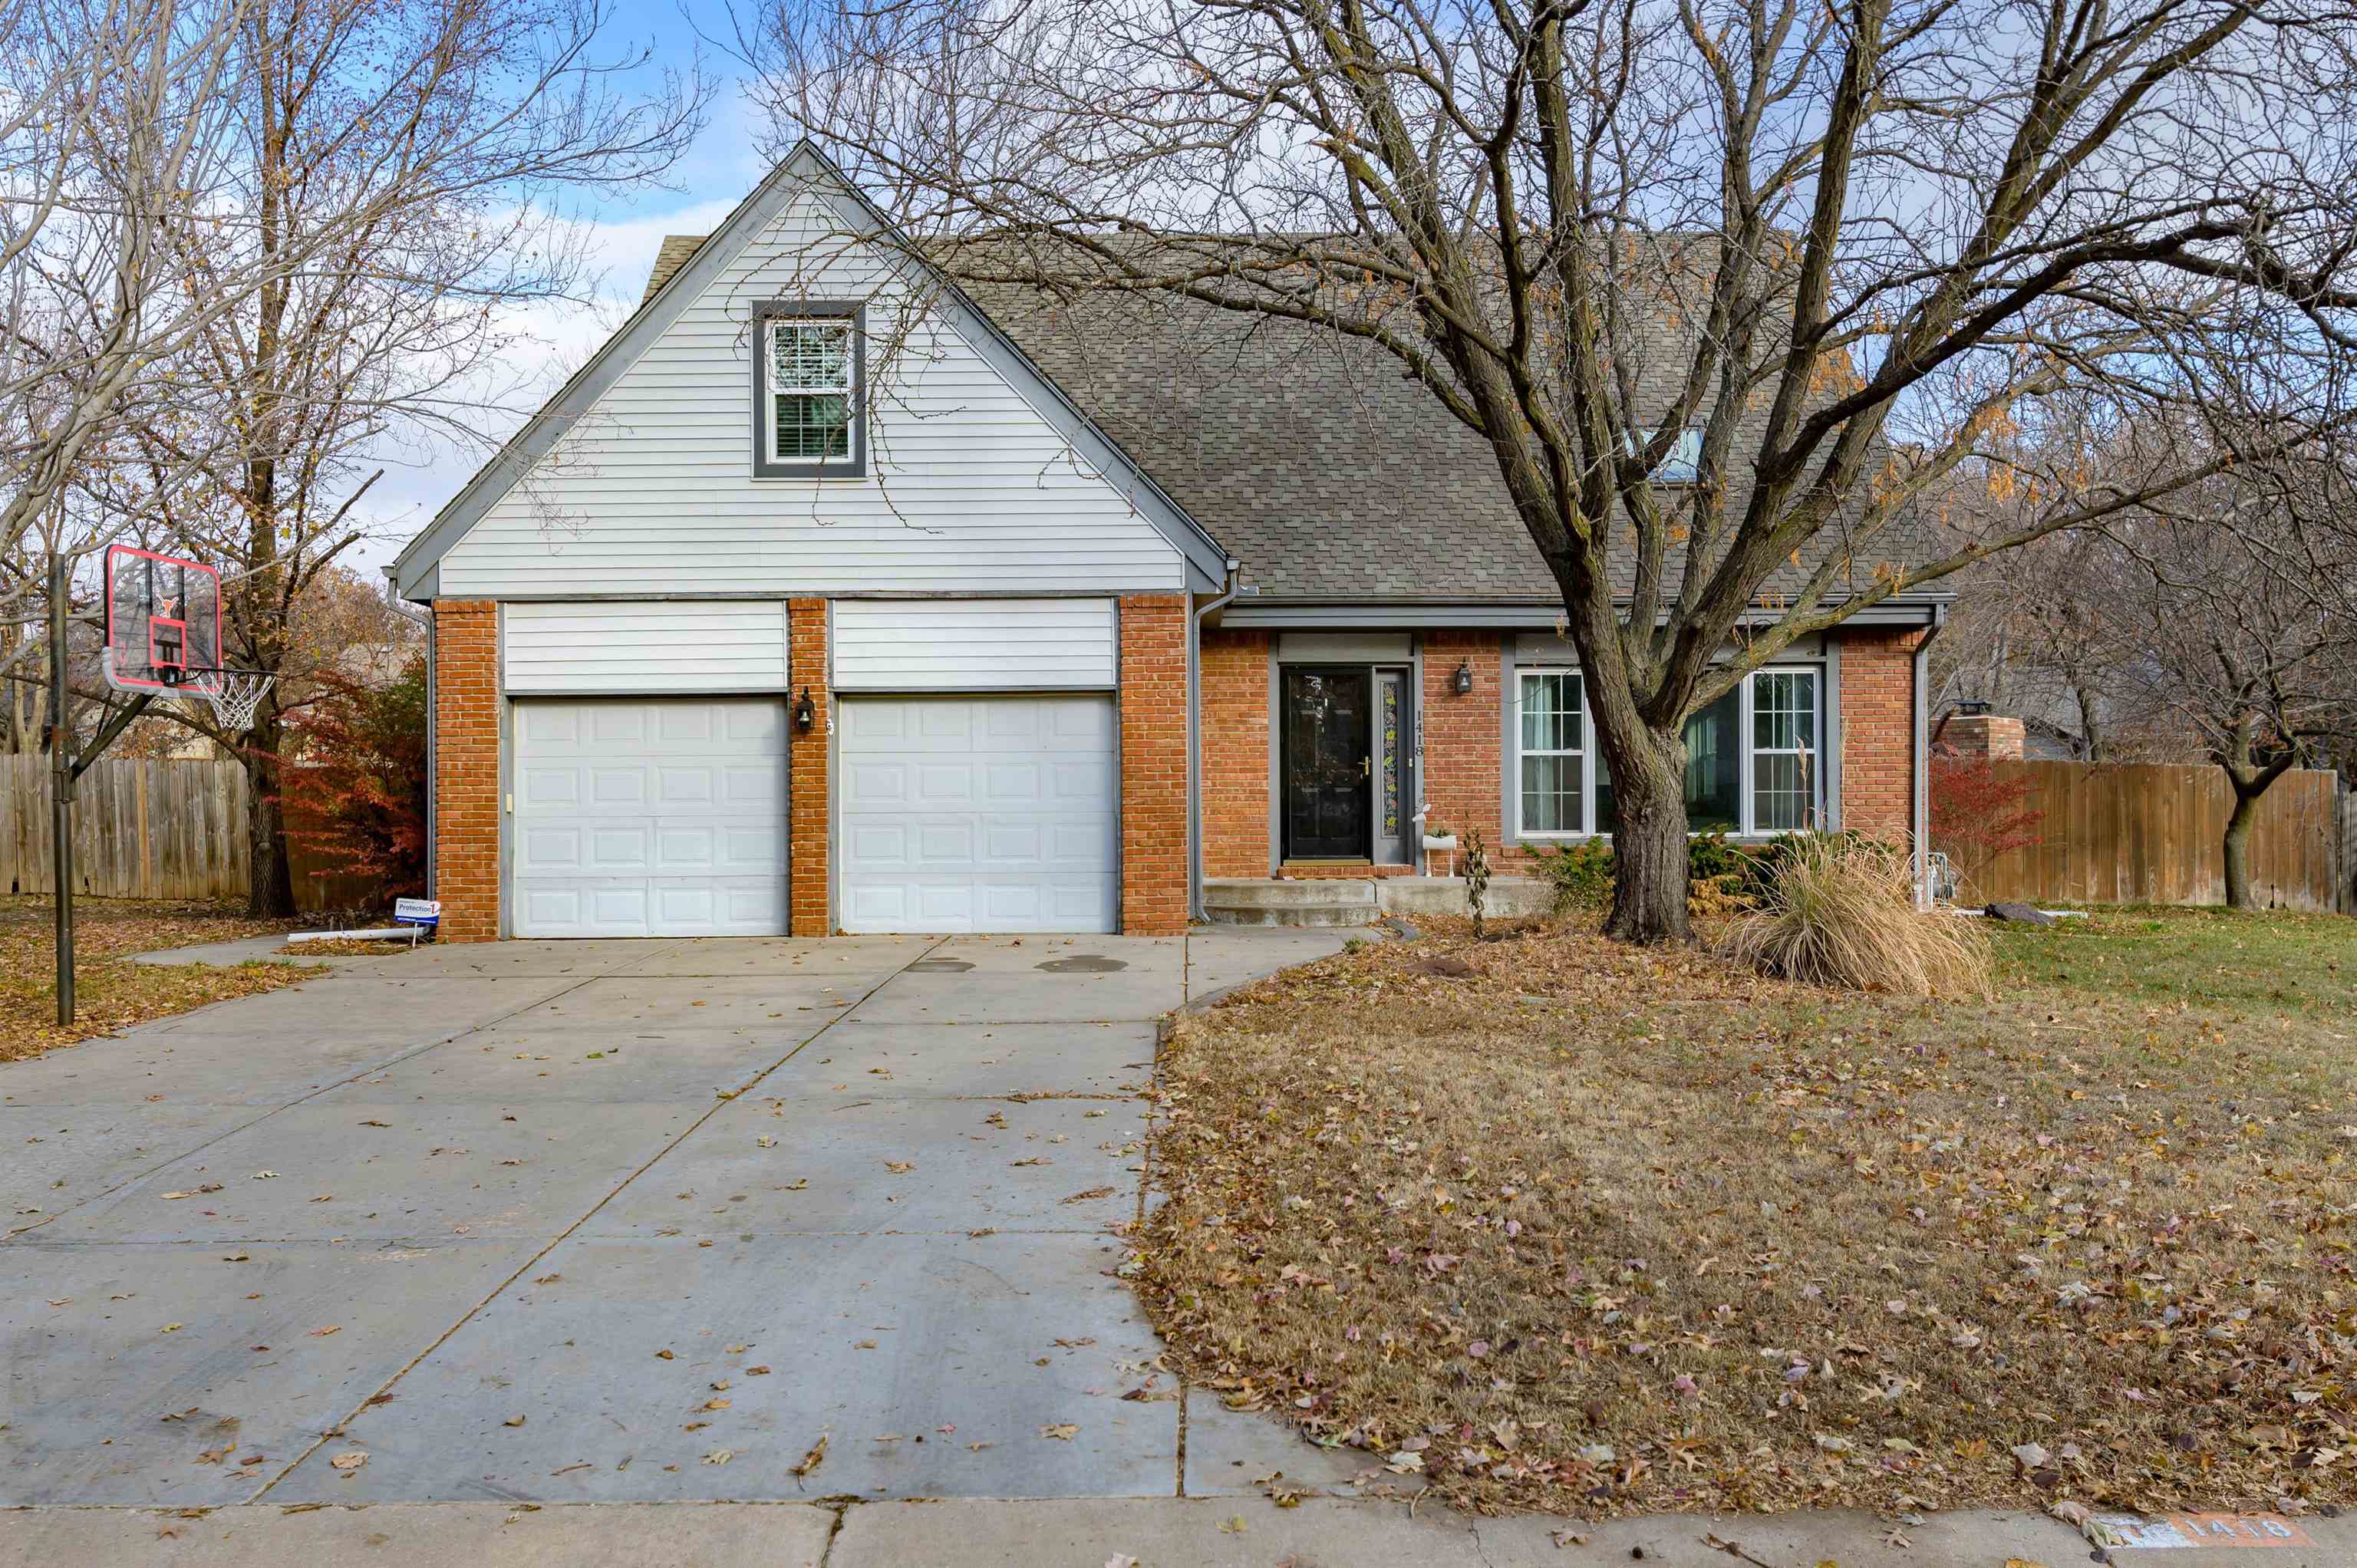 Get the BEST CHRISTMAS GIFT EVER! This 4 bedroom, 3.5 bath, full finished basement with in ground sa